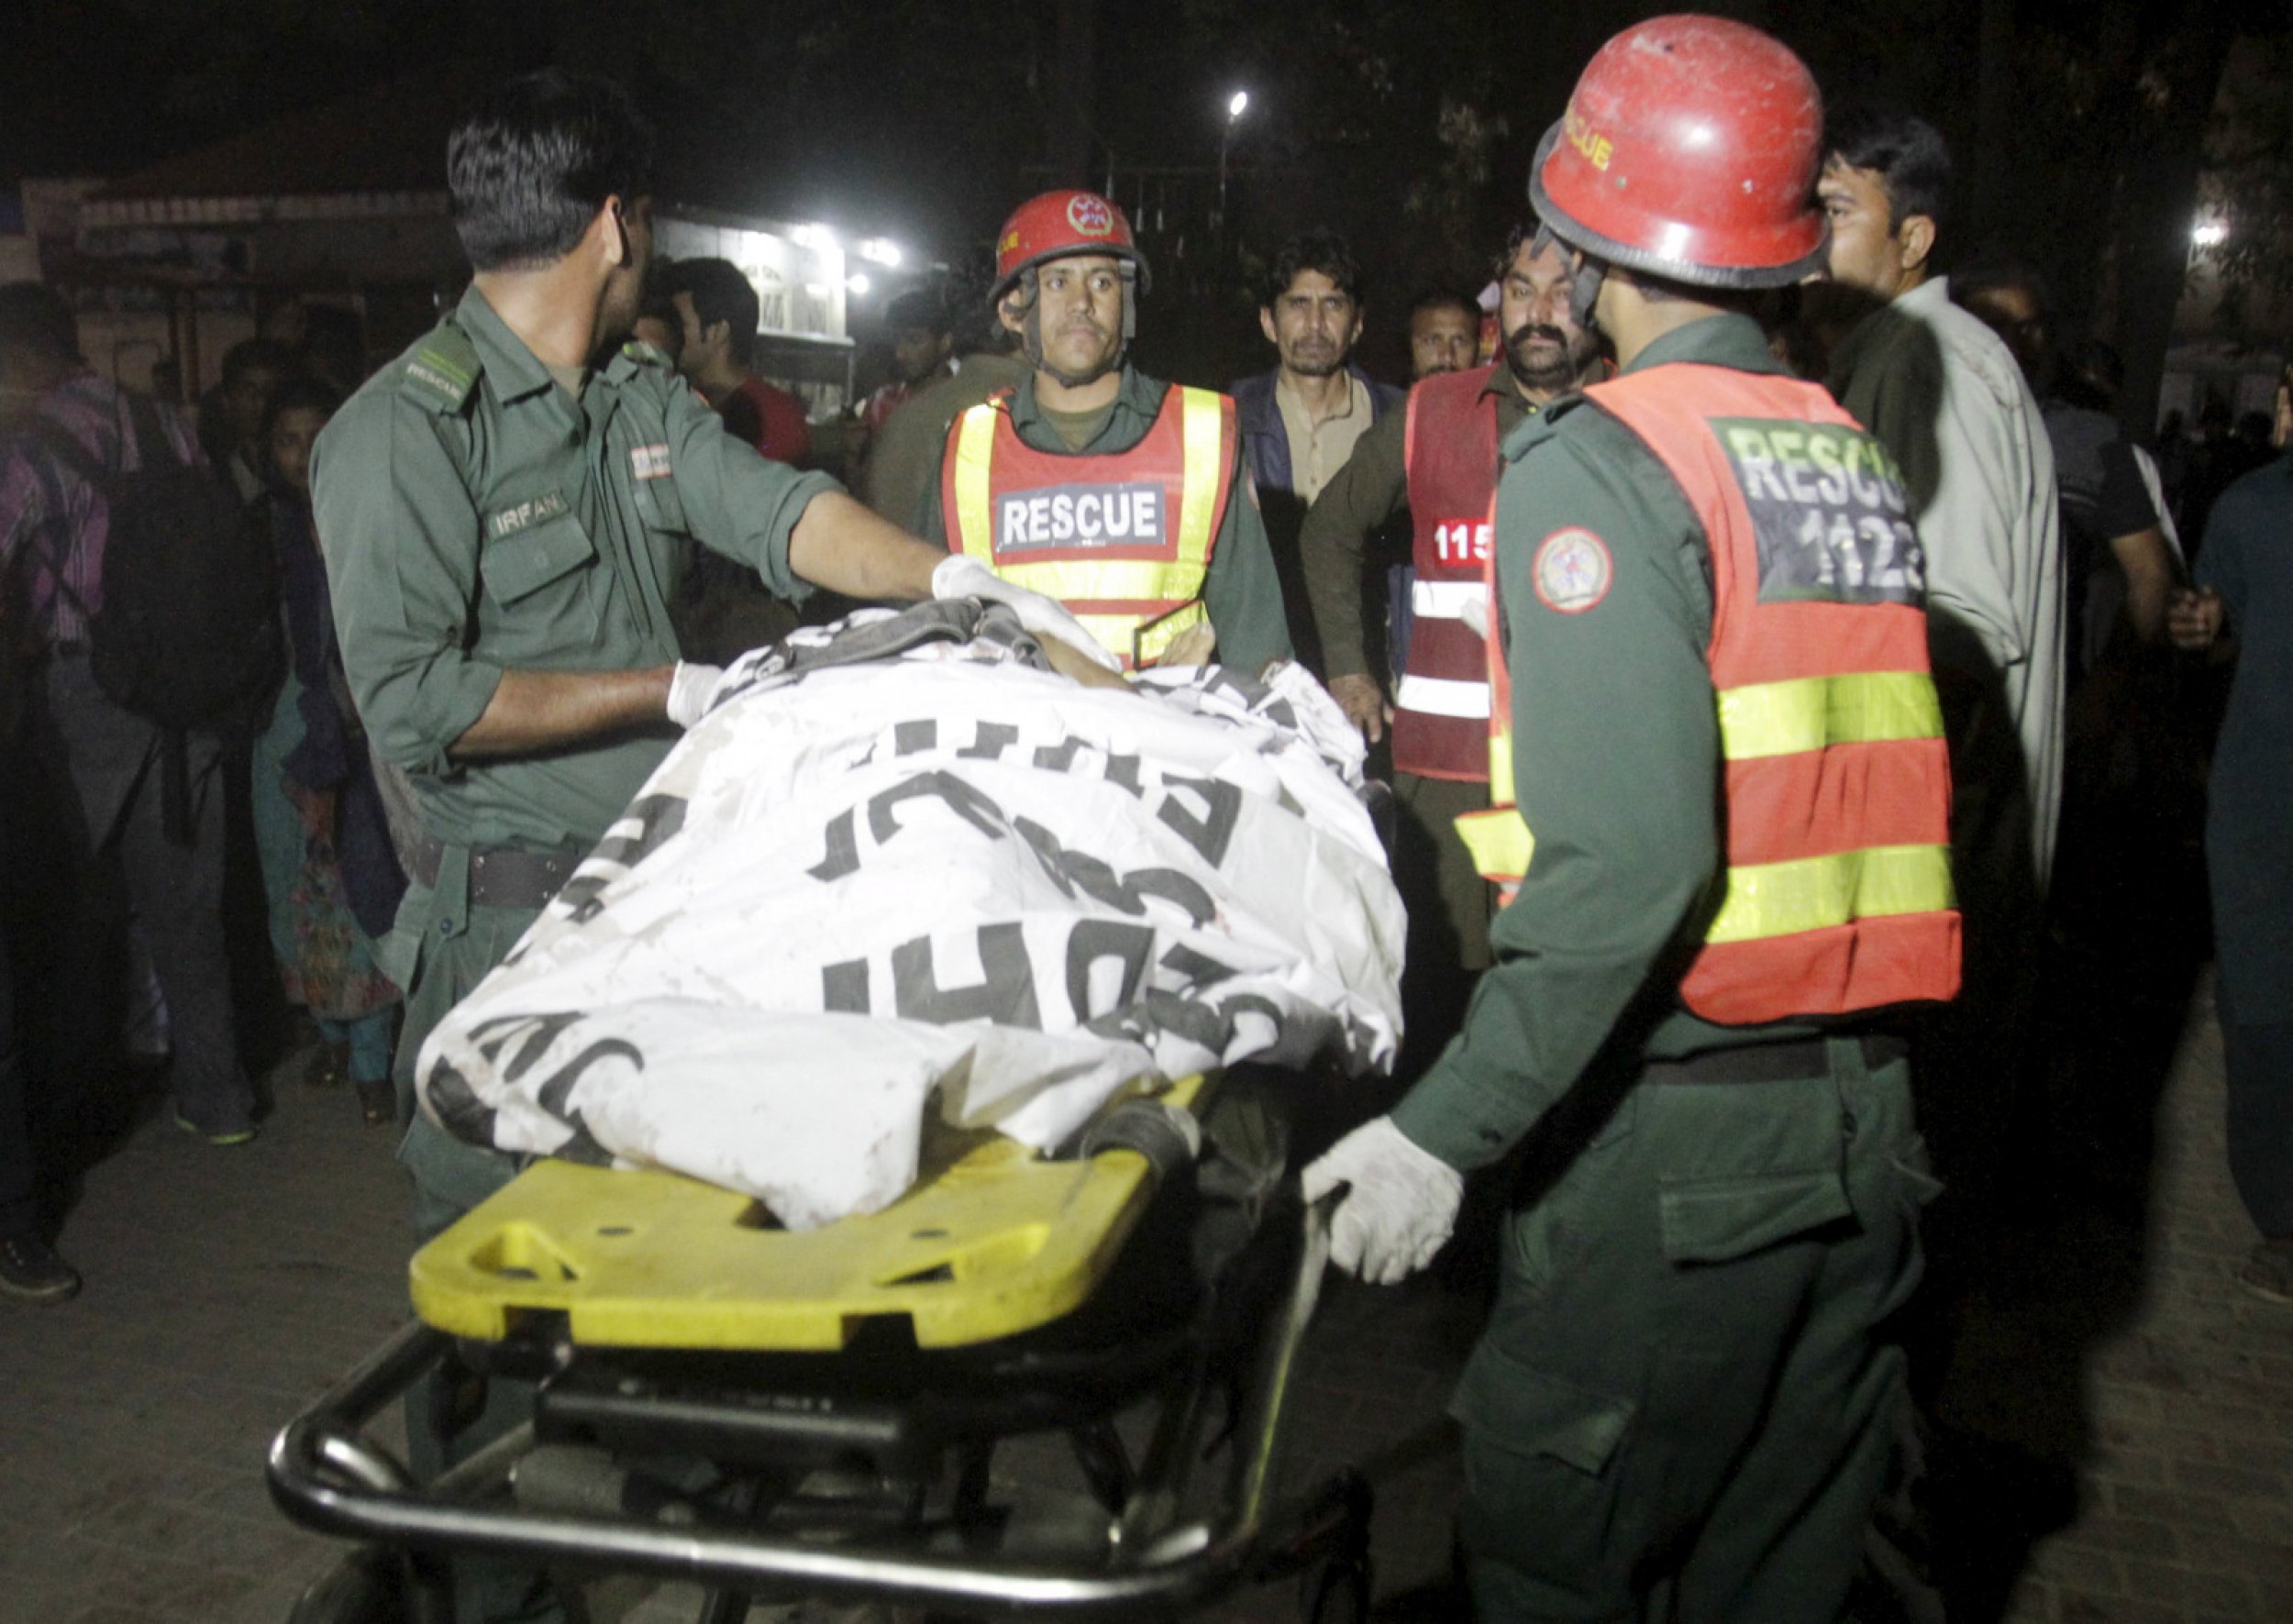 Taliban Faction Claims Responsibilty For Bombing In Pakistan